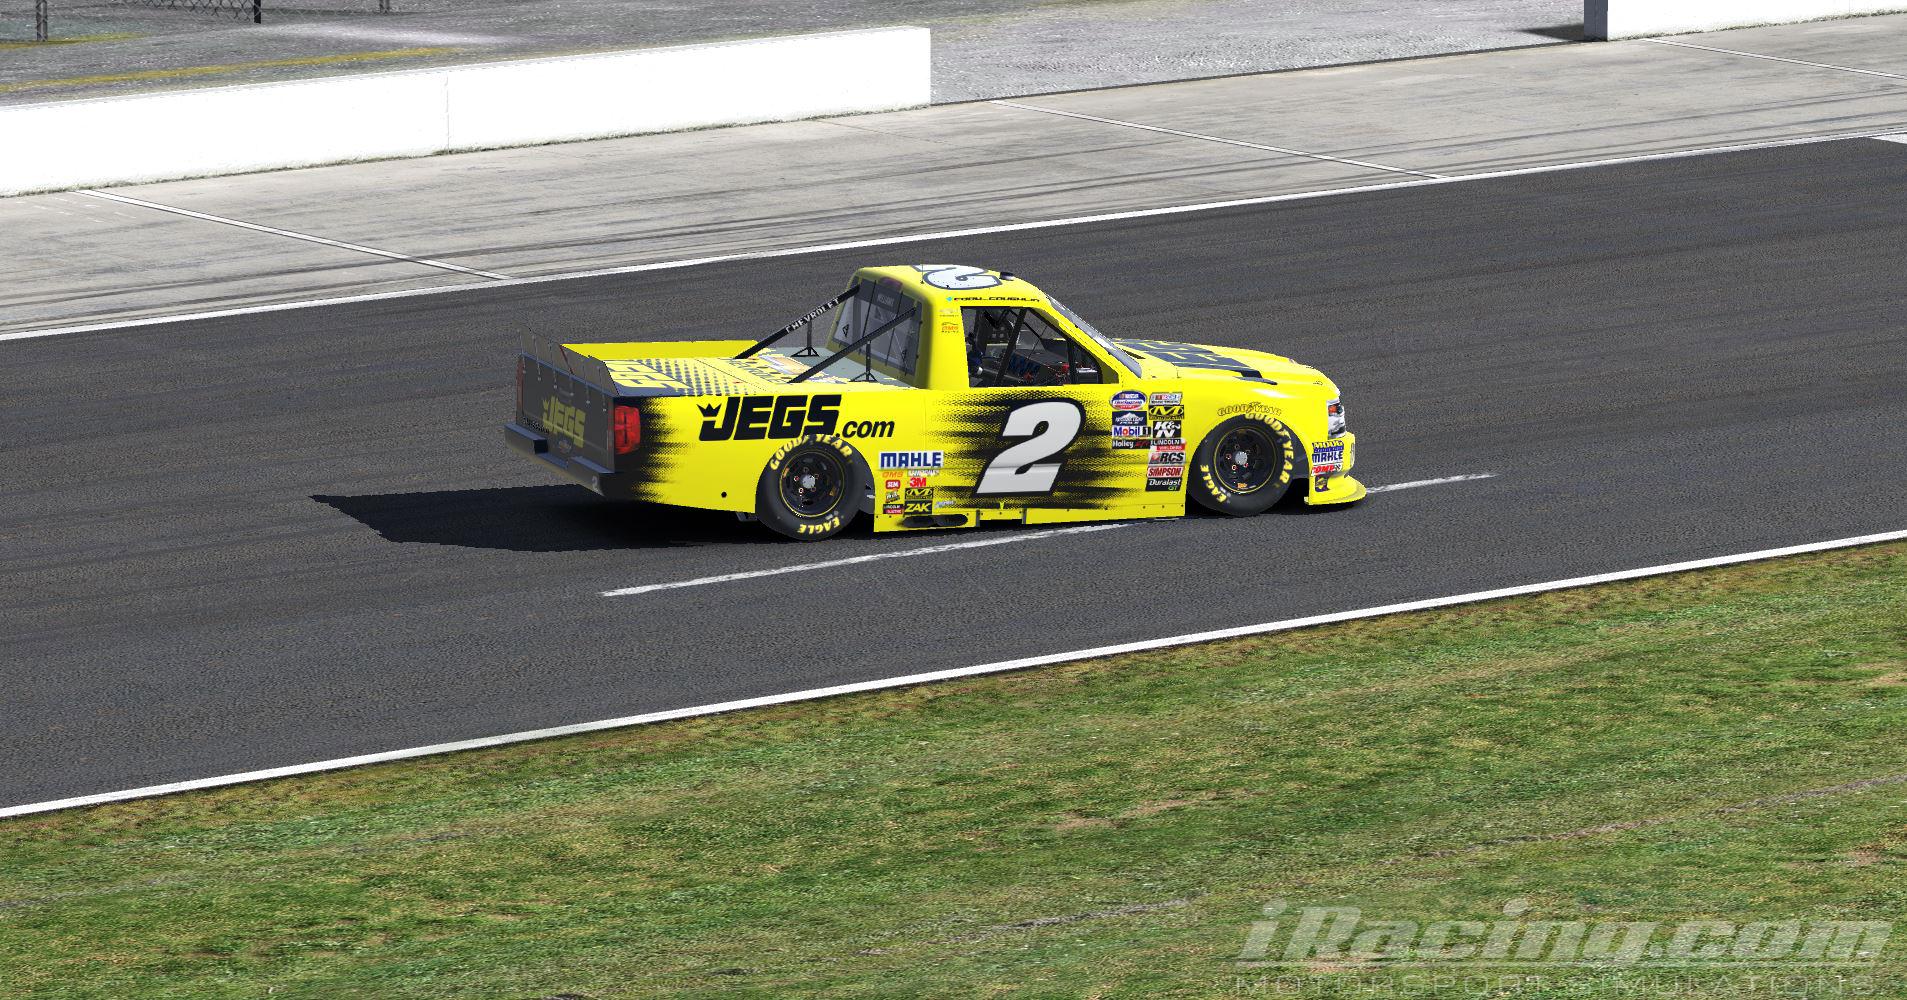 Preview of Jegs Chevrolet Silverado by Trent Williams